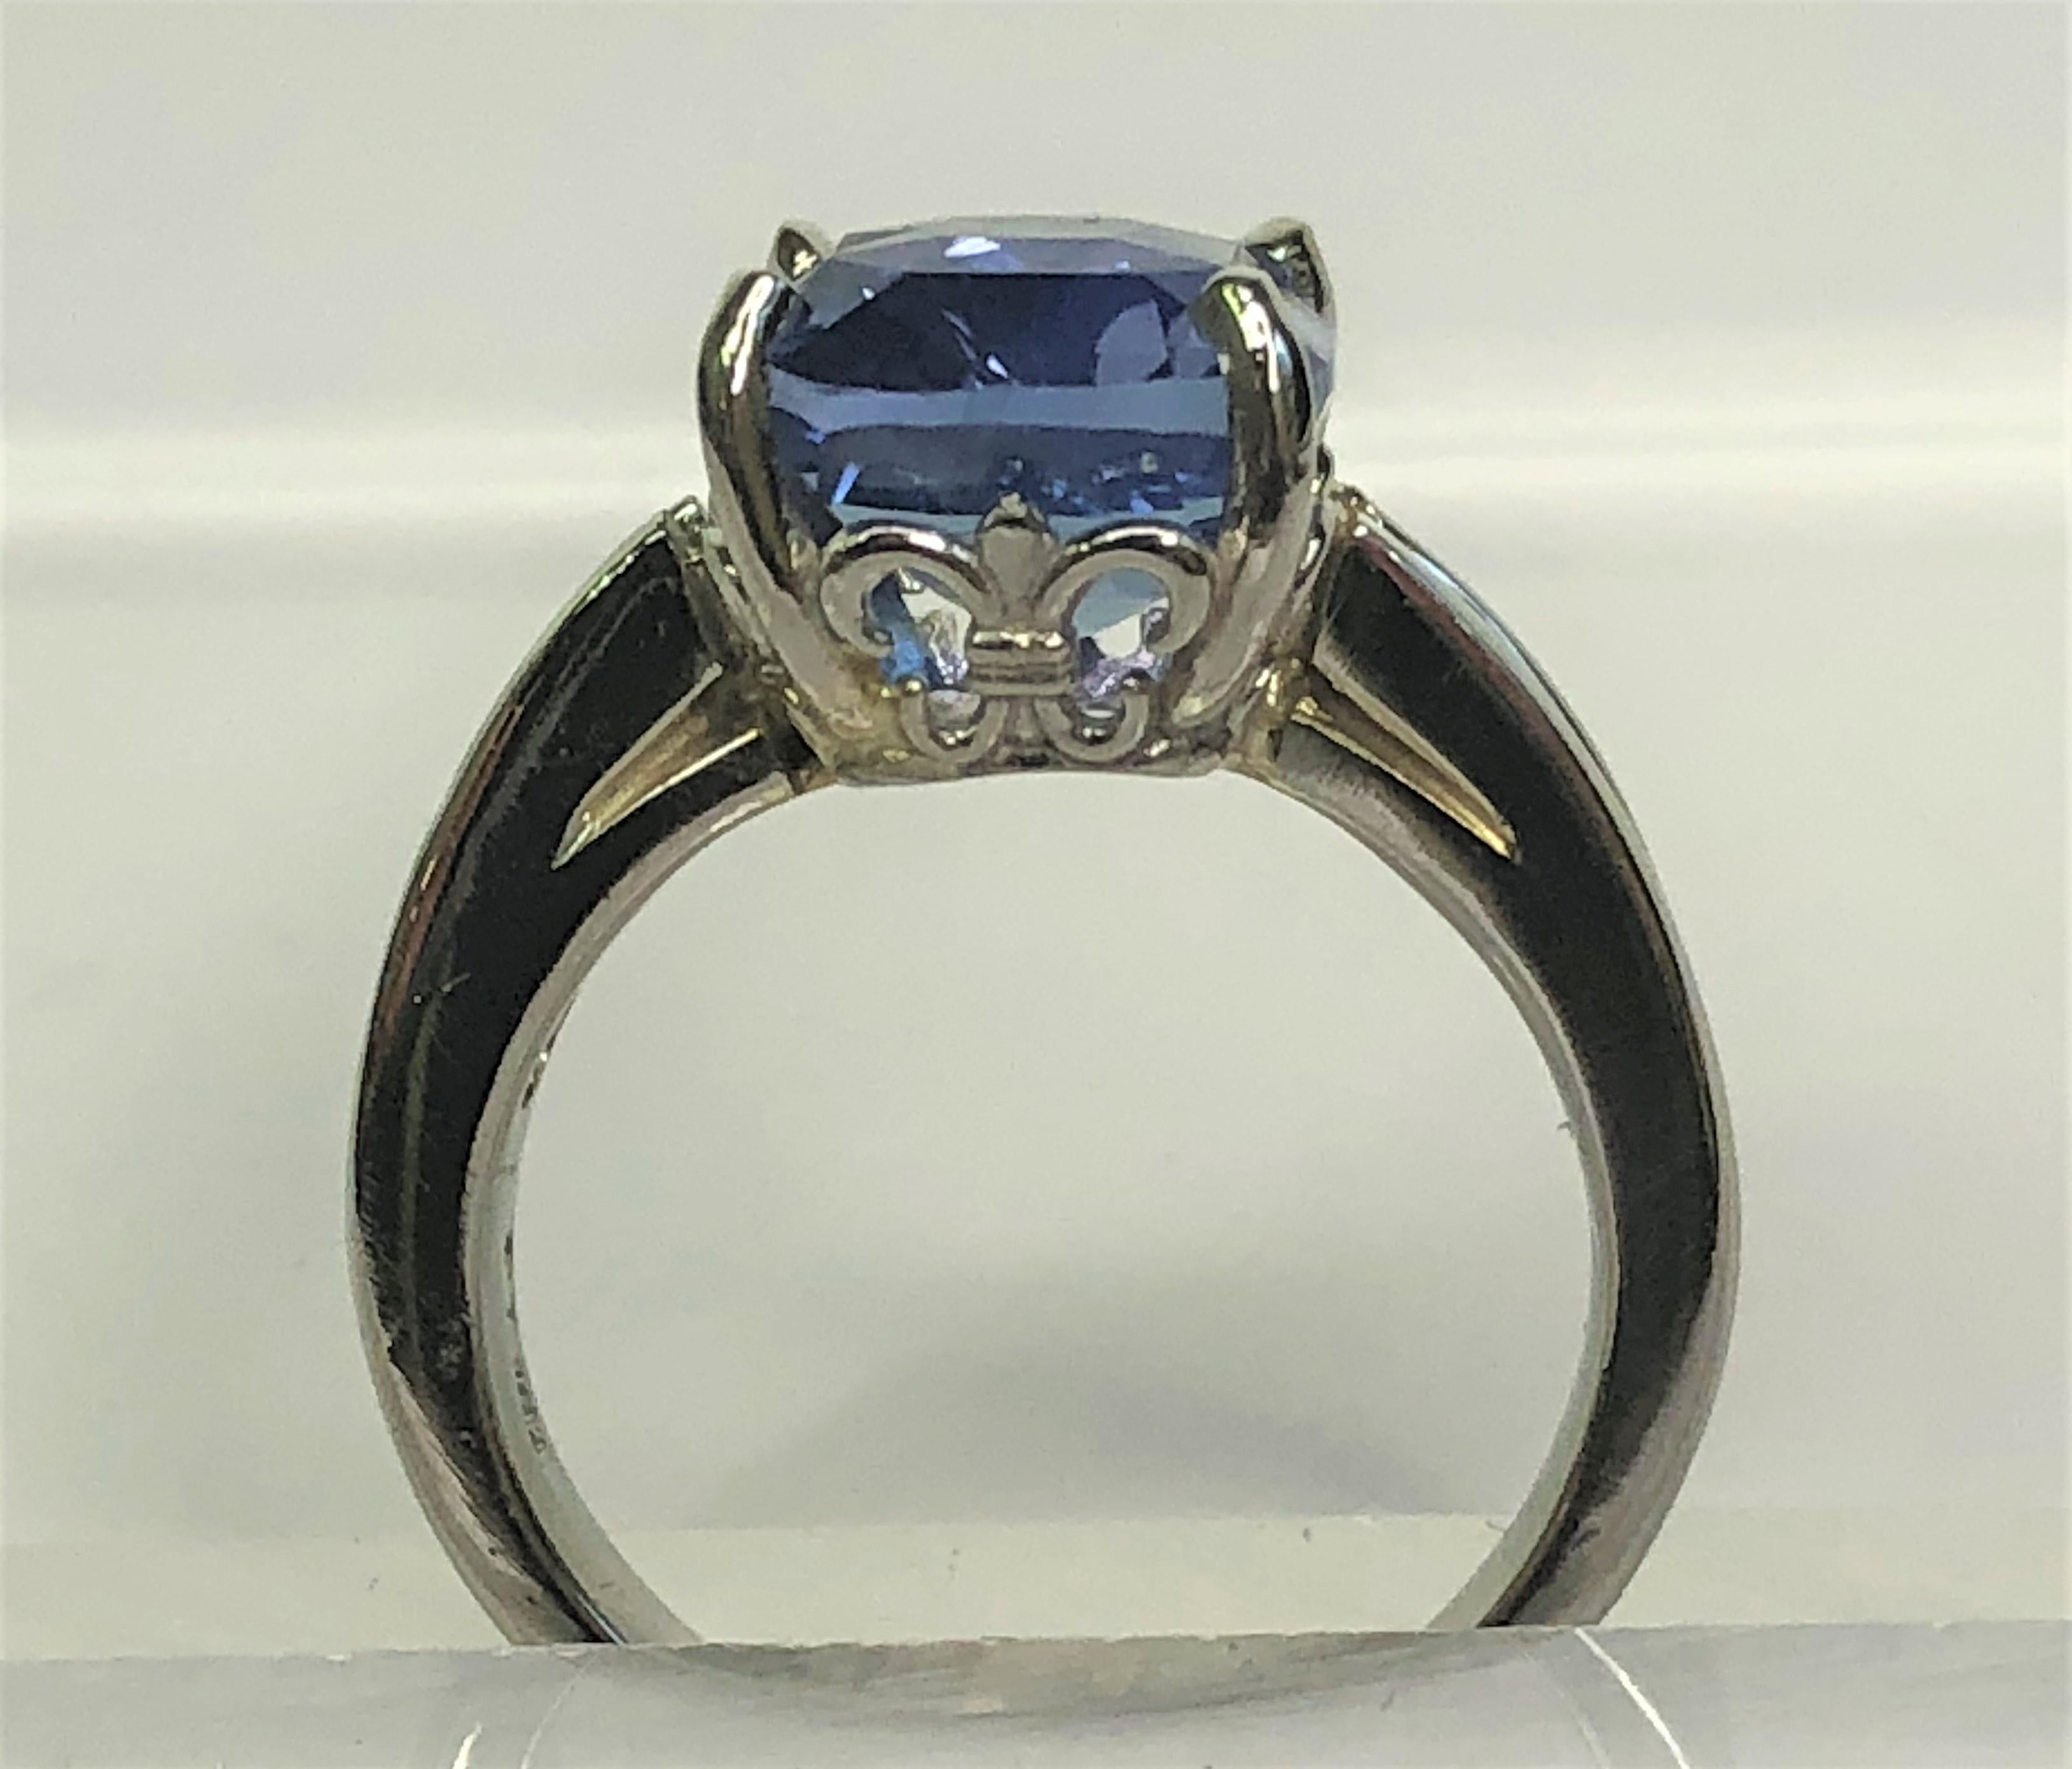 This GIA certified natural, no heat sapphire is a must have!
Modified Brilliant step cut sapphire is 10.64 x 9.03 x 6.10mm, 6.18 total carat weight.
5 graduating square cut diamonds on each shoulder, ranging from approximately .12tdw - .06tdw
Per